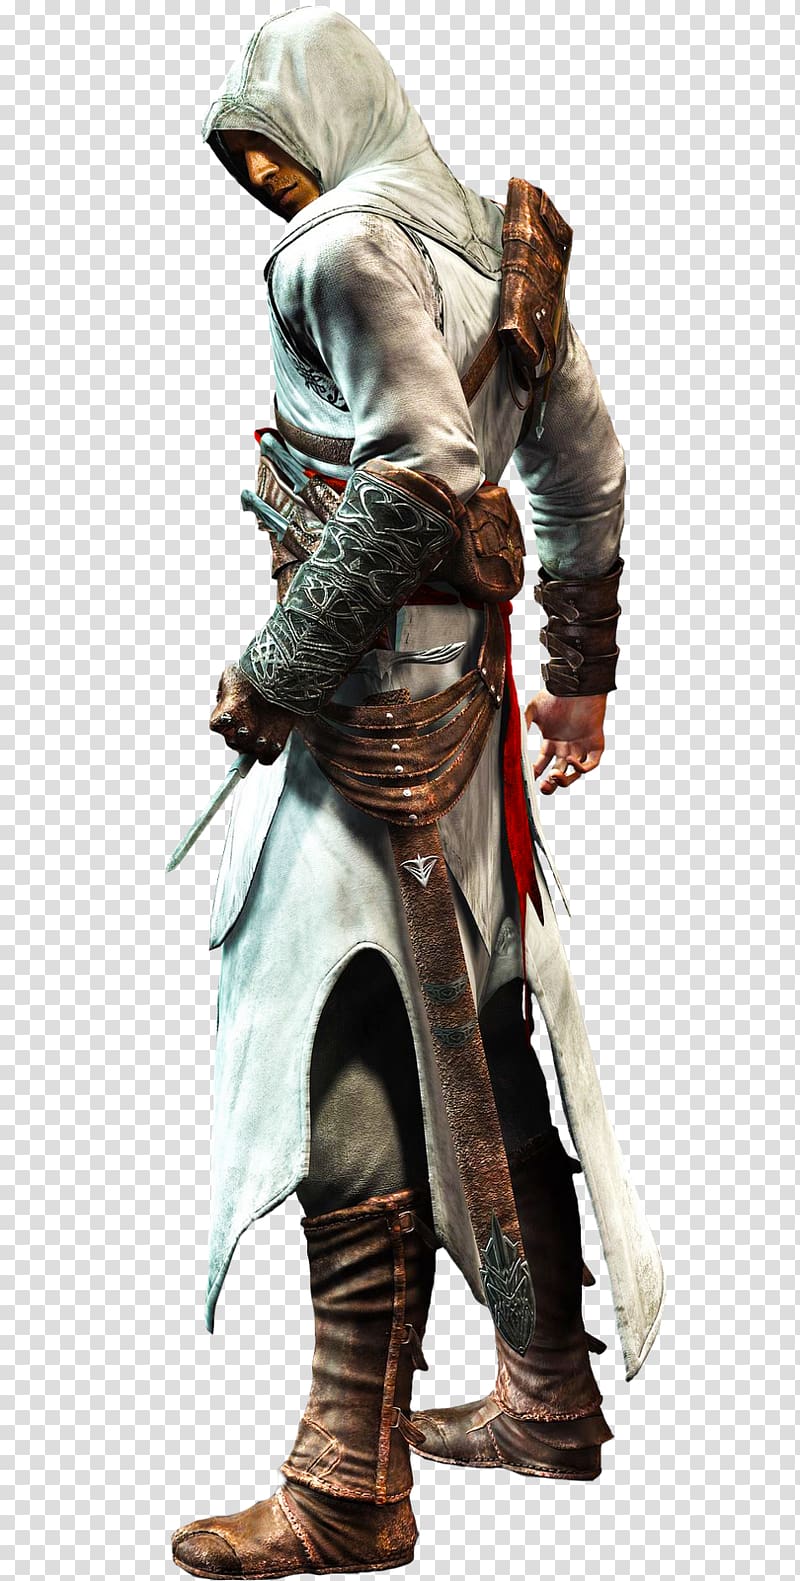 Assassin's Creed II Assassin's Creed: Brotherhood Assassin's Creed IV: Black Flag Assassin's Creed Rogue, Assasins Creed transparent background PNG clipart